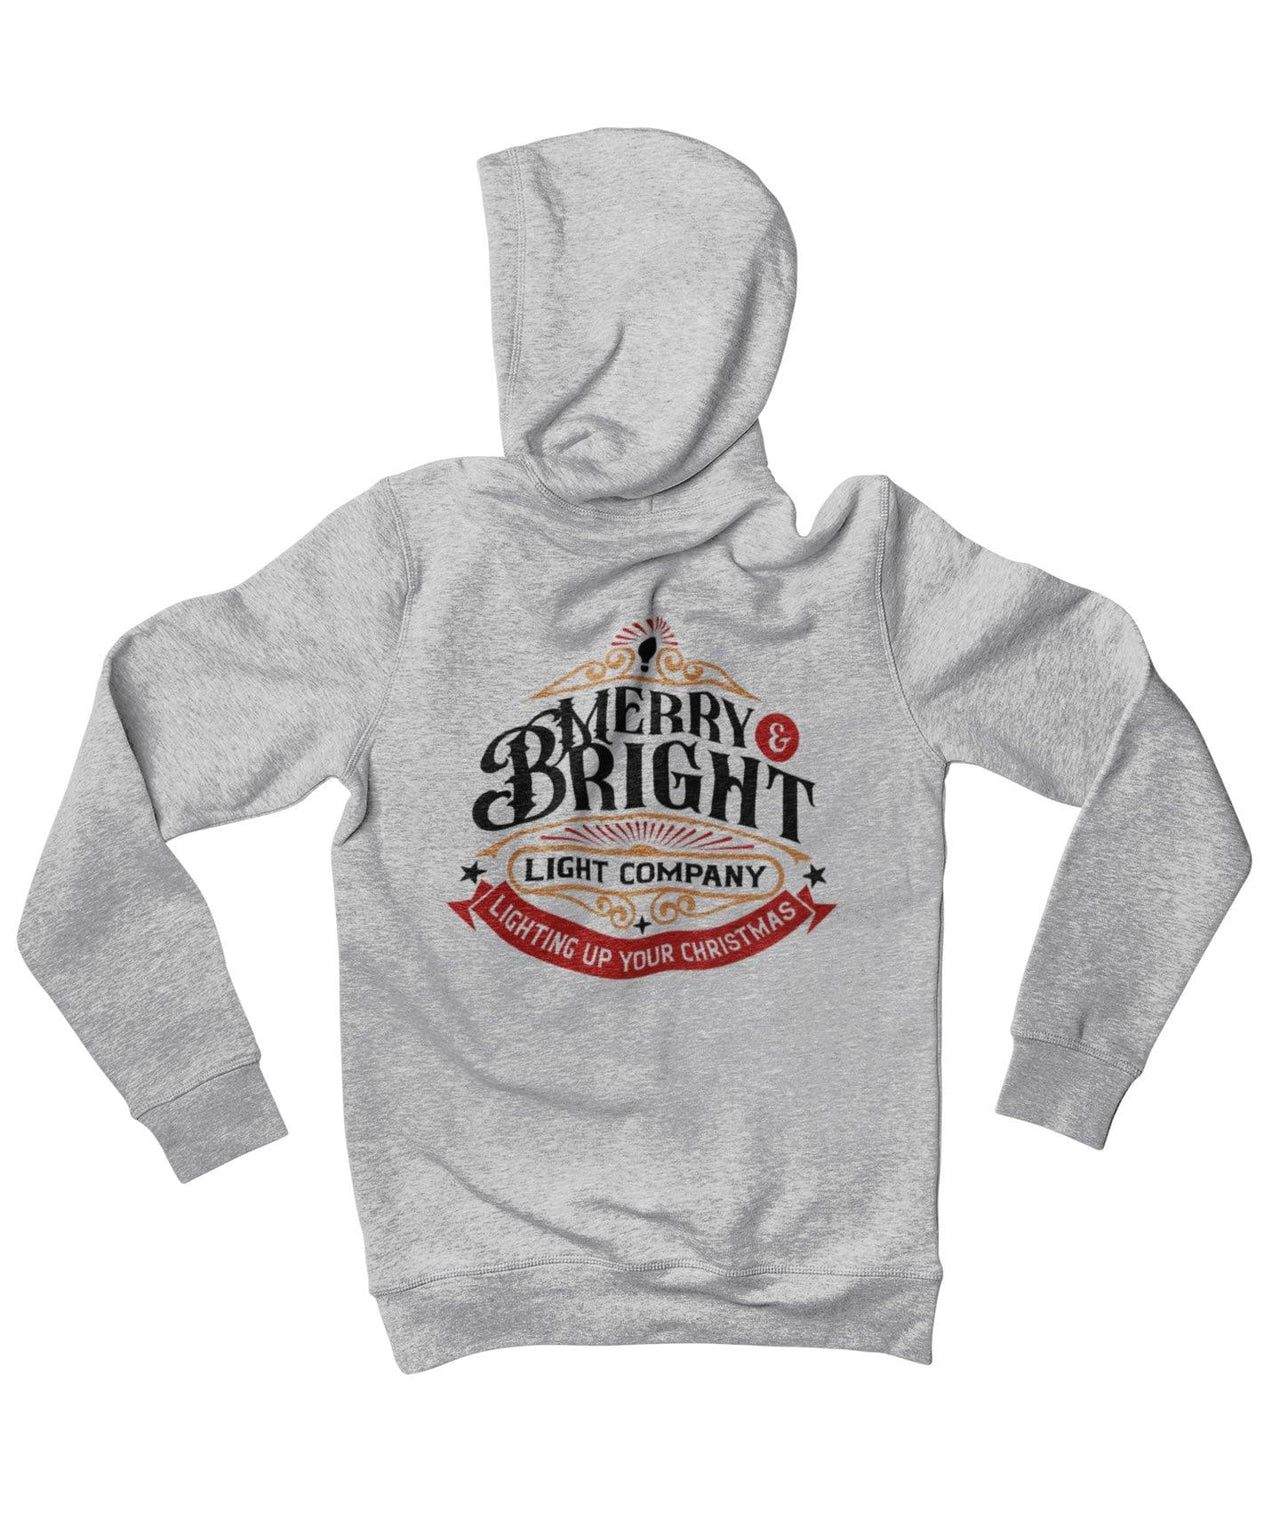 Merry Bright Light Company Colour Back Printed Christmas Hoodie For Men and Women 8Ball